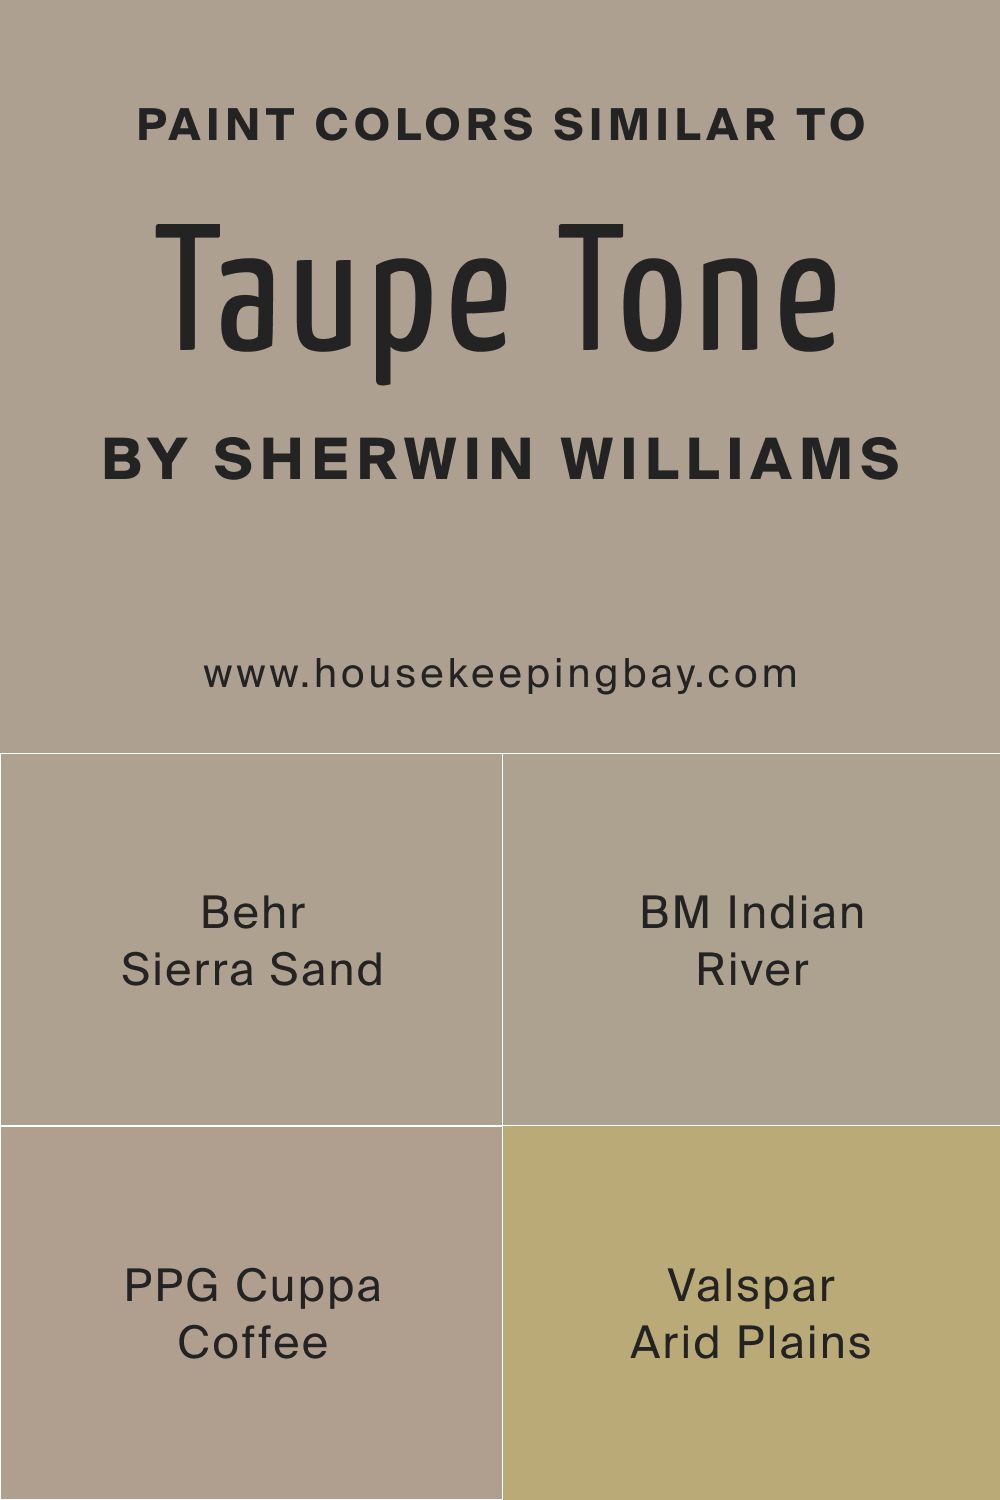 Paint Colors Similar to Taupe Tone SW 7633 by Sherwin Williams